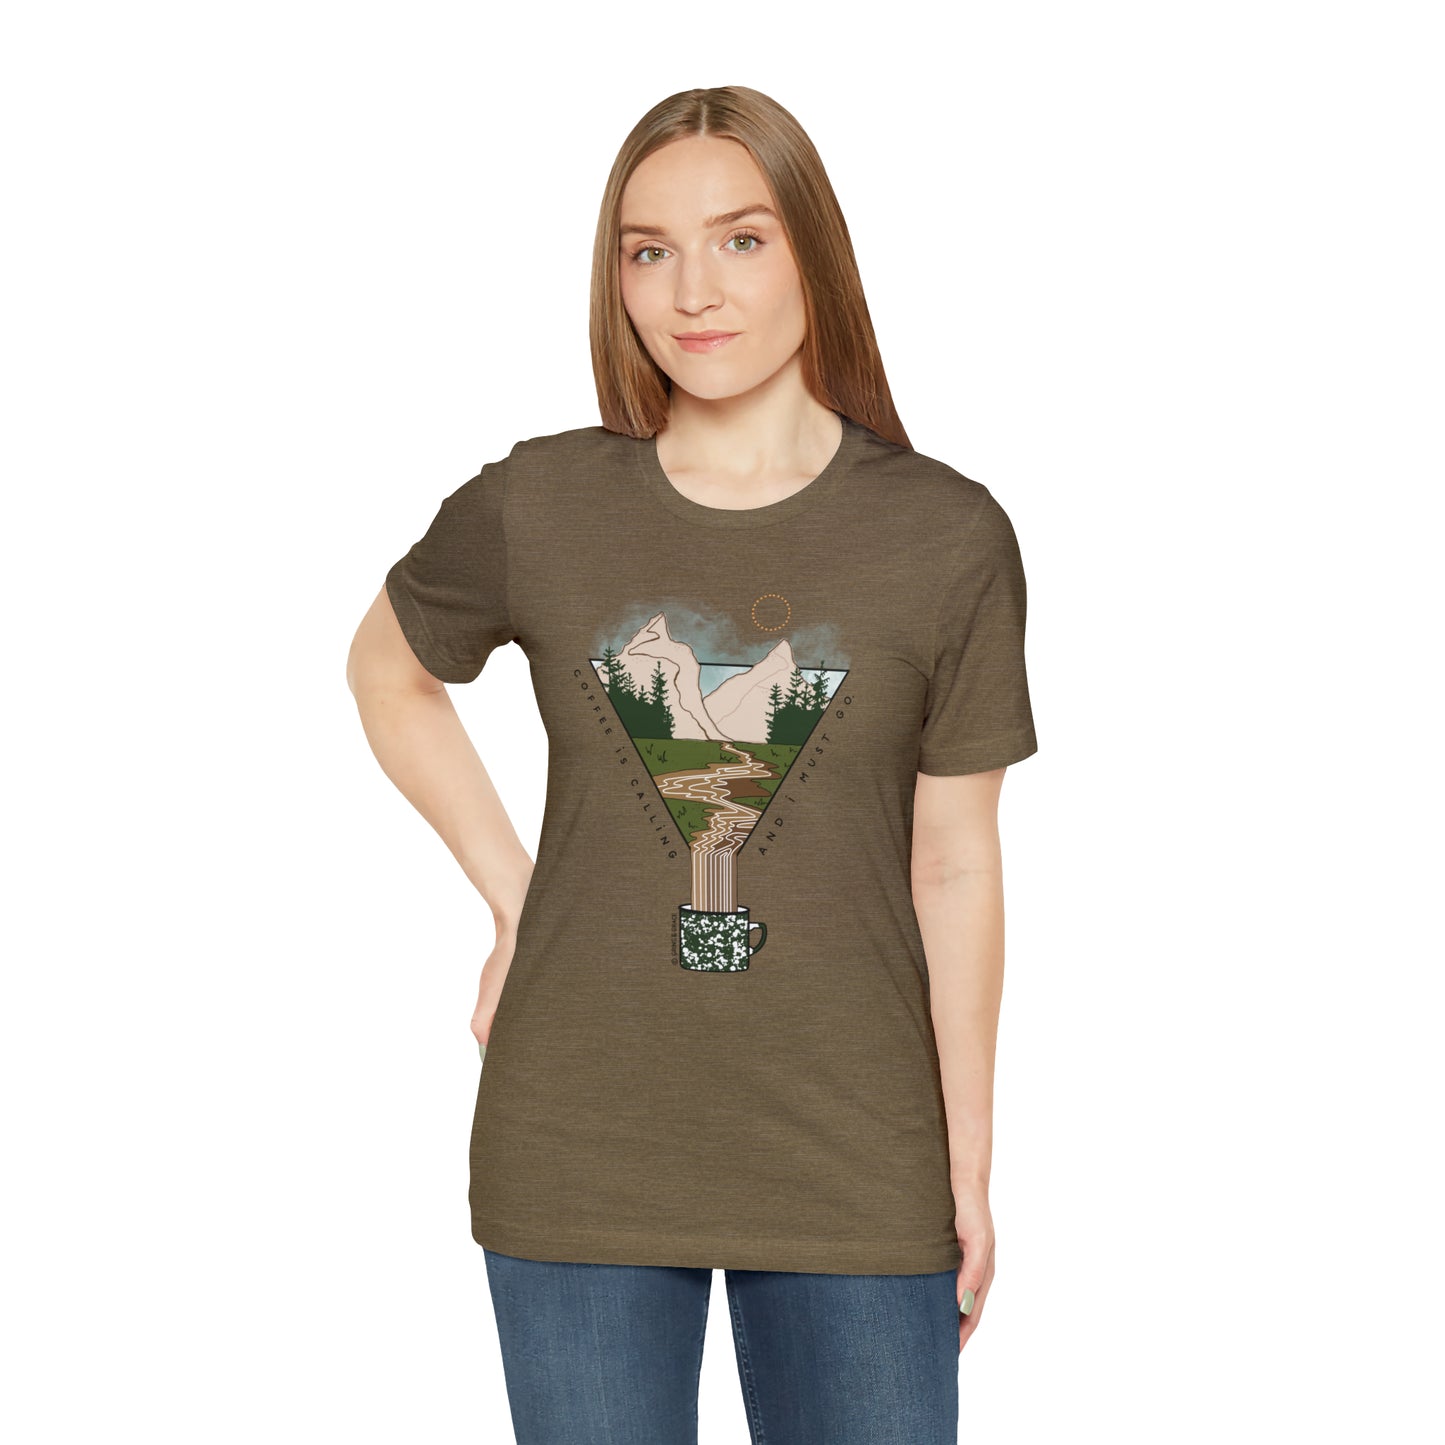 'COFFEE IS CALLING AND I MUST GO' UNISEX T-SHIRT | FULL COLOR